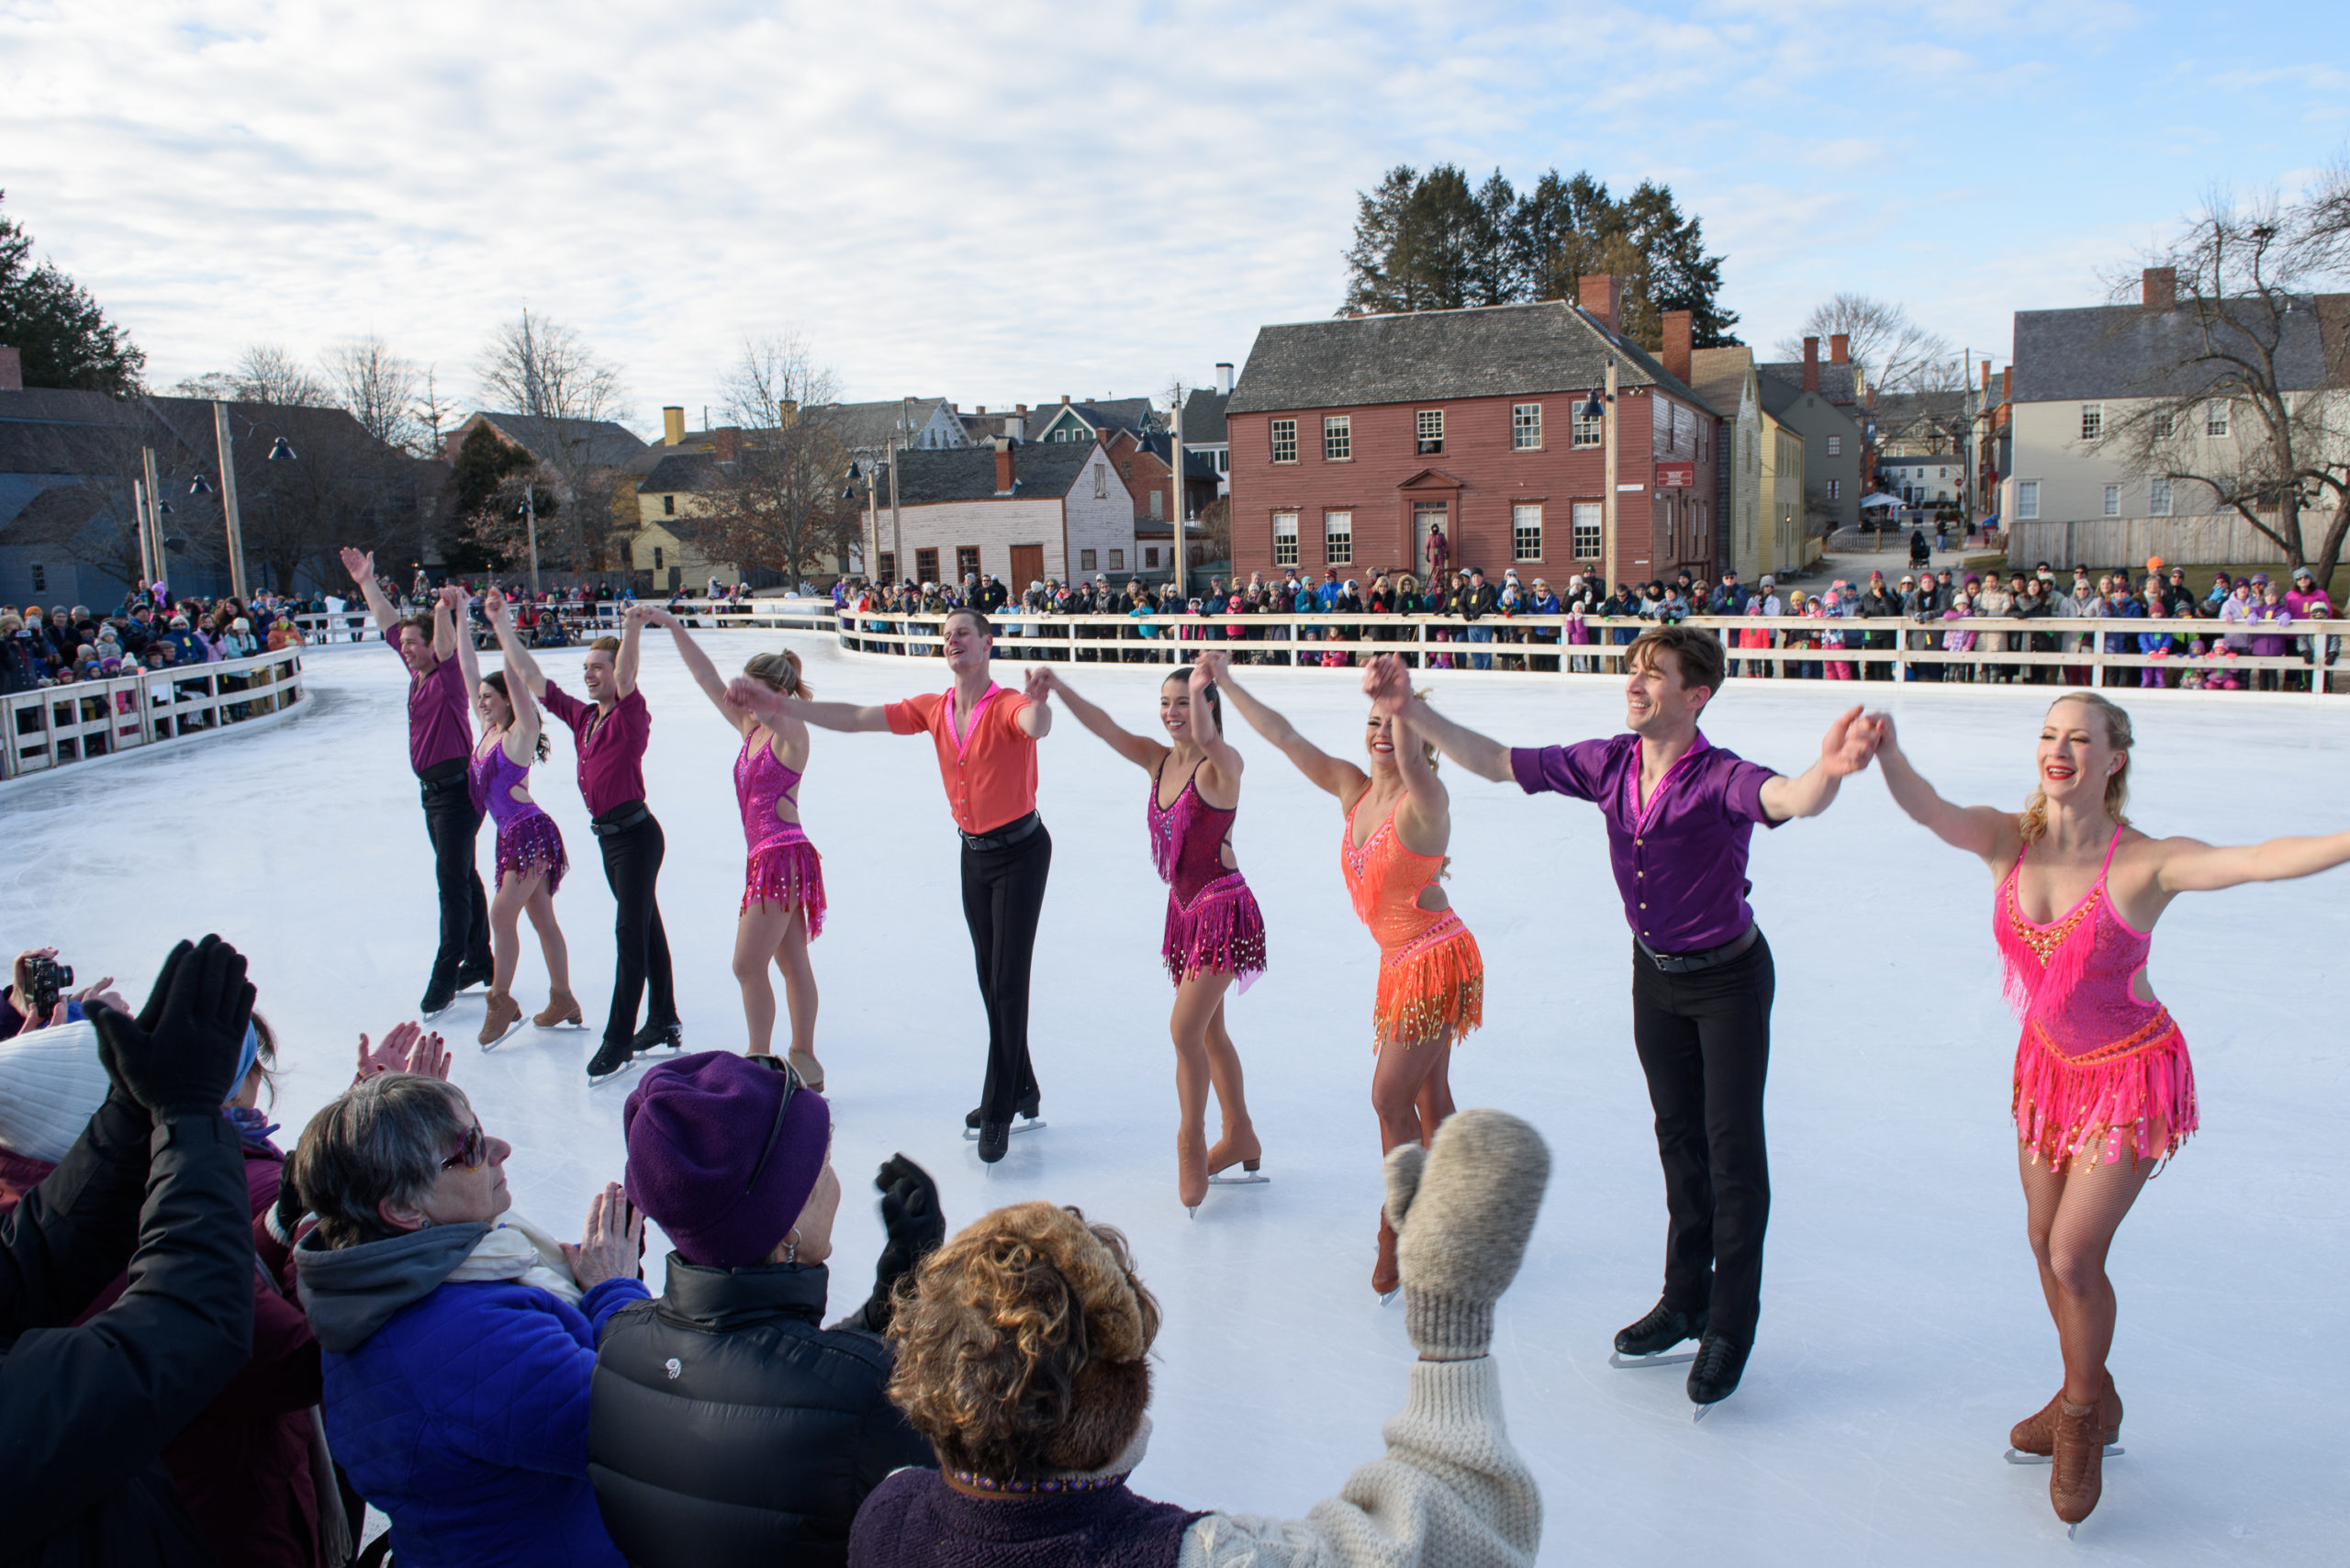 The 9 member company of Ice Dance International take a bow performing at Strawbery Banke, Portsmouth, NH.